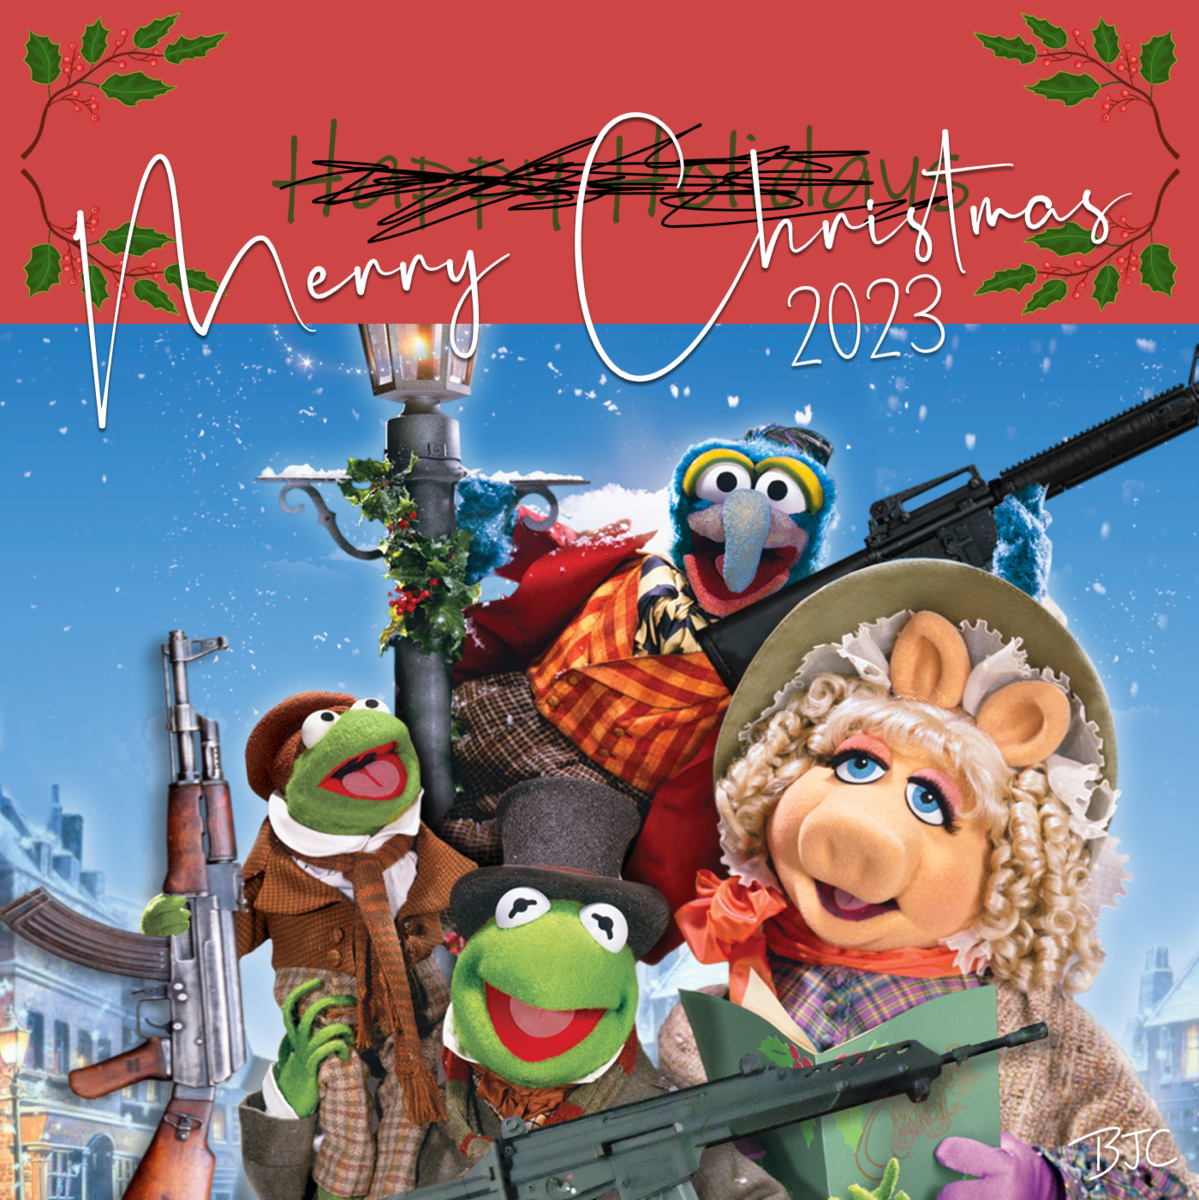 4 Muppets from a Christmas Carol looking joyous, but holding guns. The 'Happy Holidays' is scratched out with 'Merry Christmas' written over it.